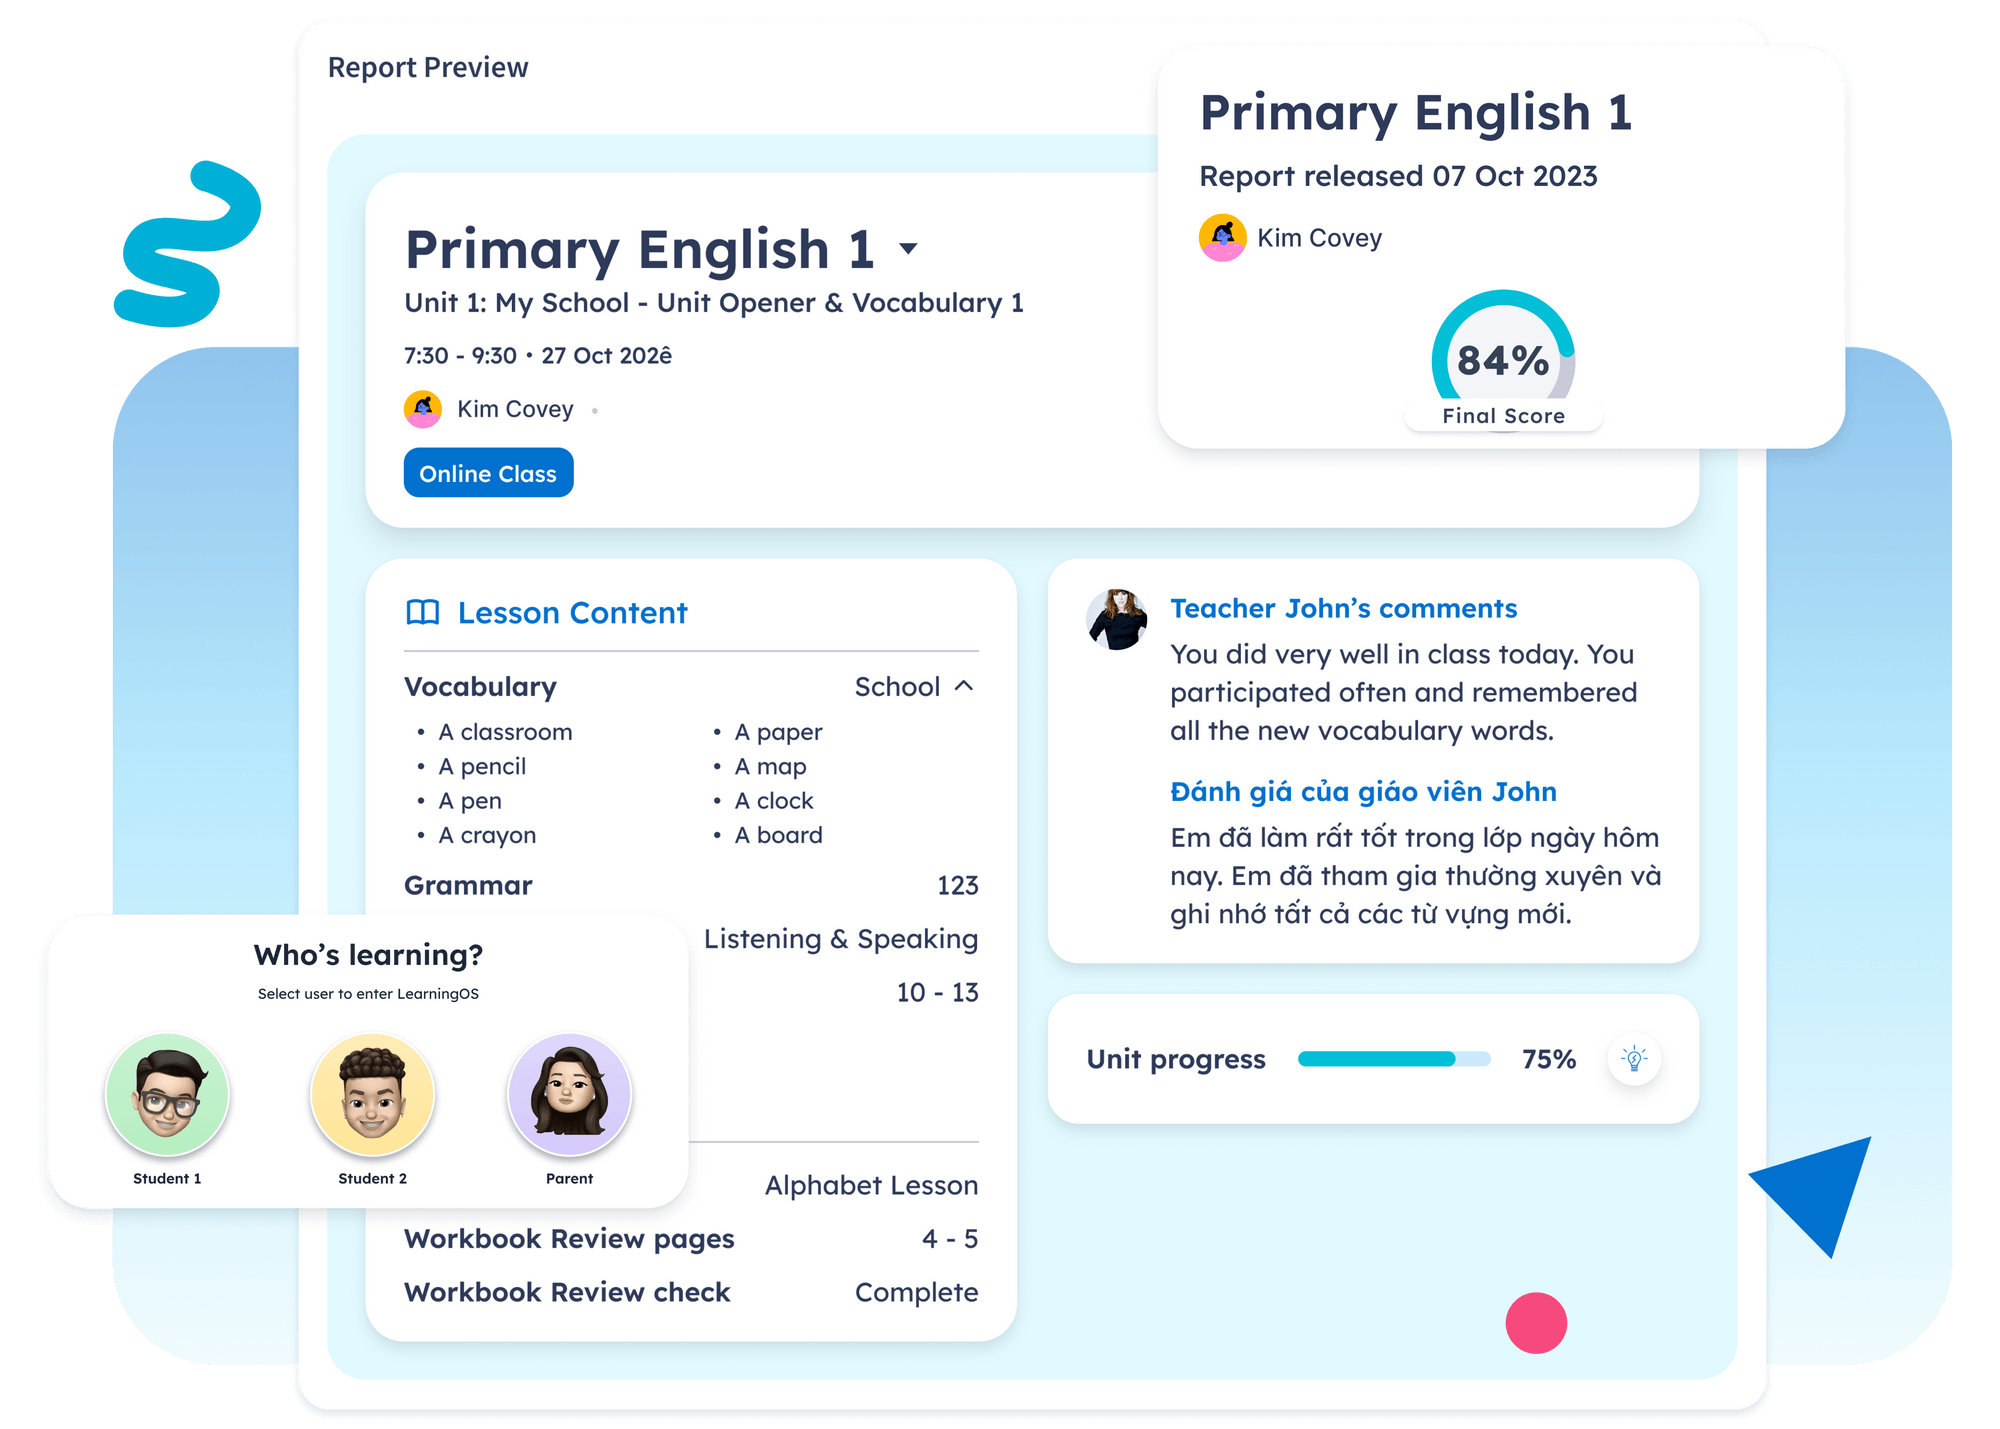 Report preview. Teachers can view class content and leave constructive feedback in multiple languages.